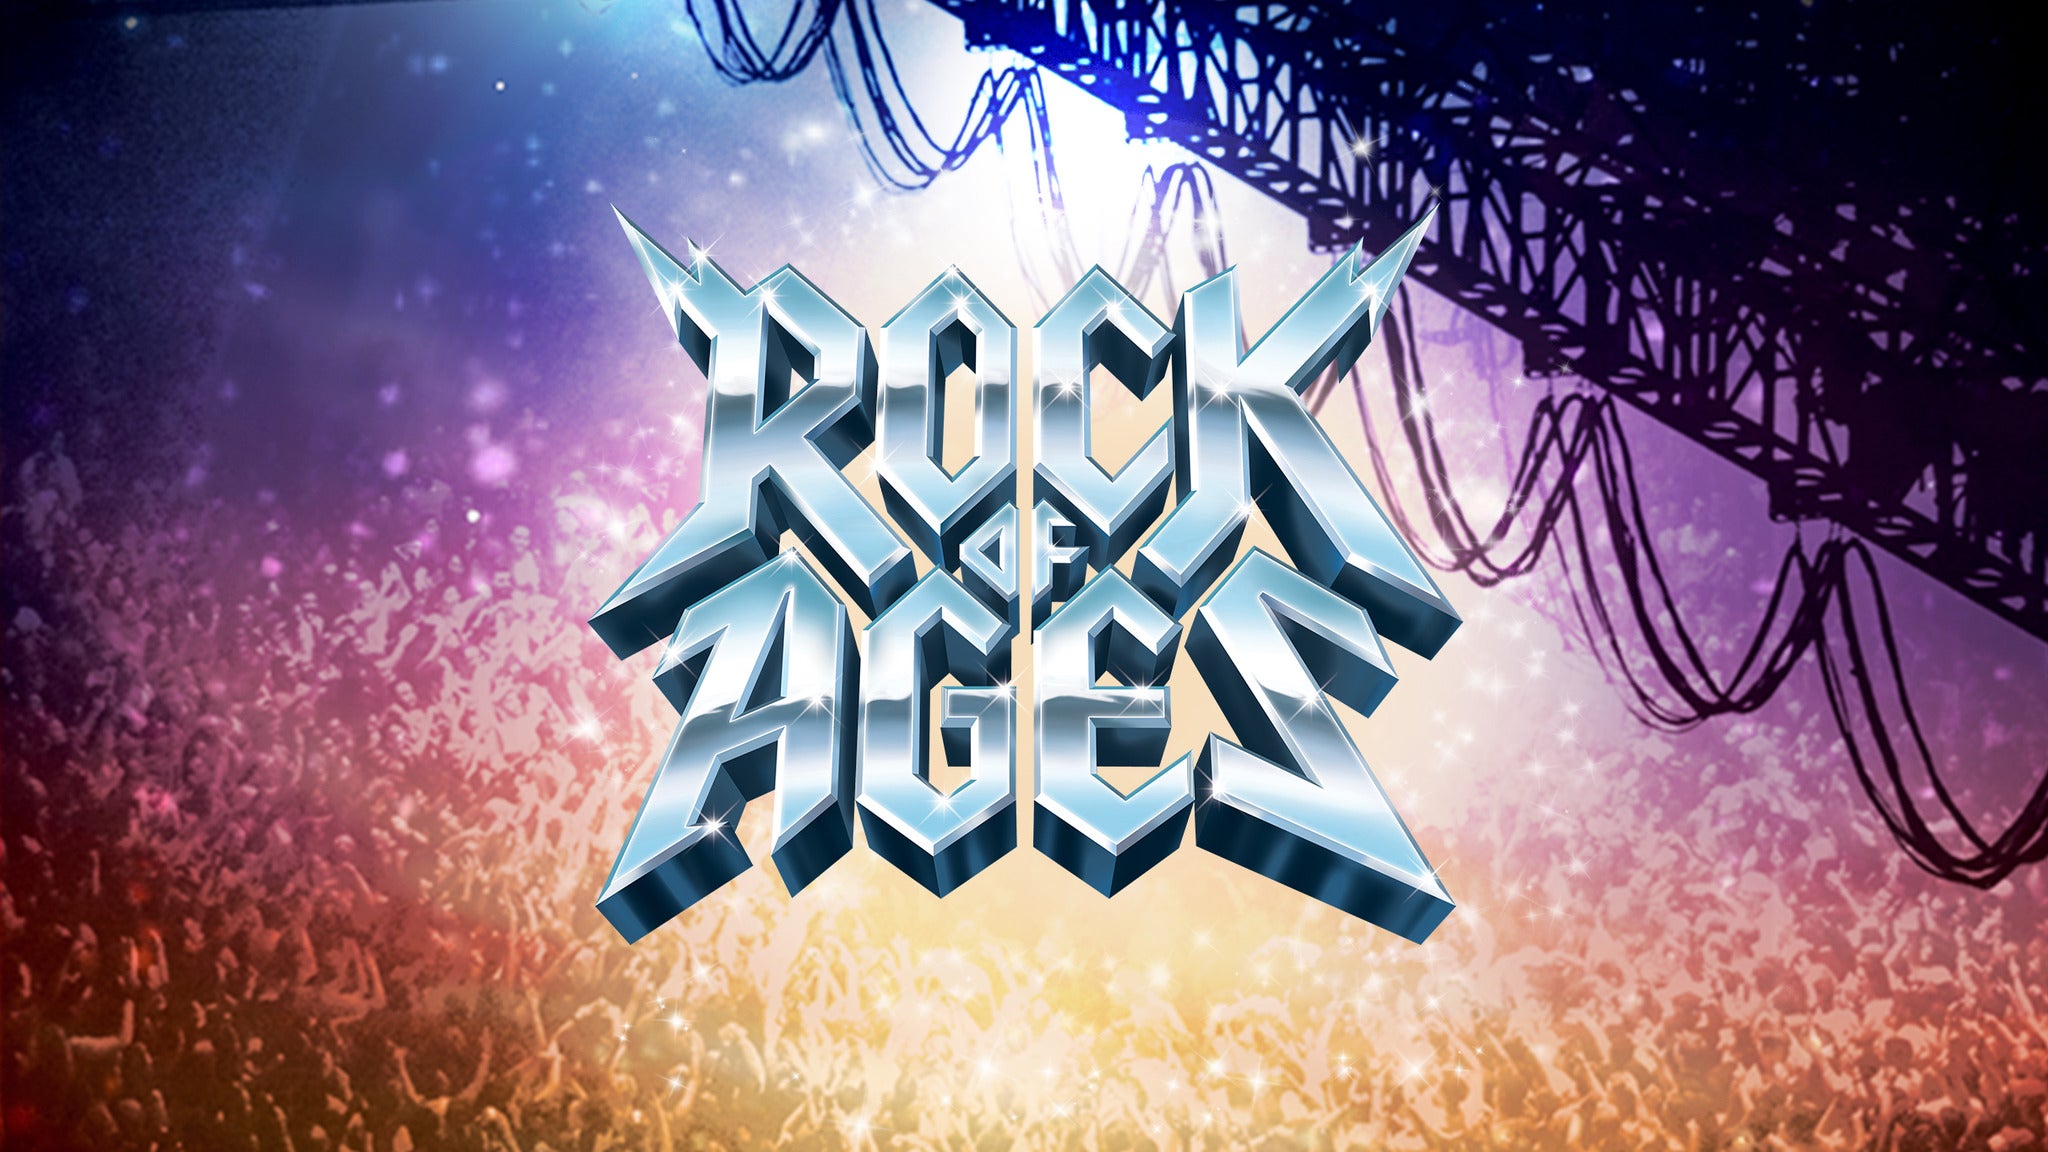 Rock of Ages - A New Musical